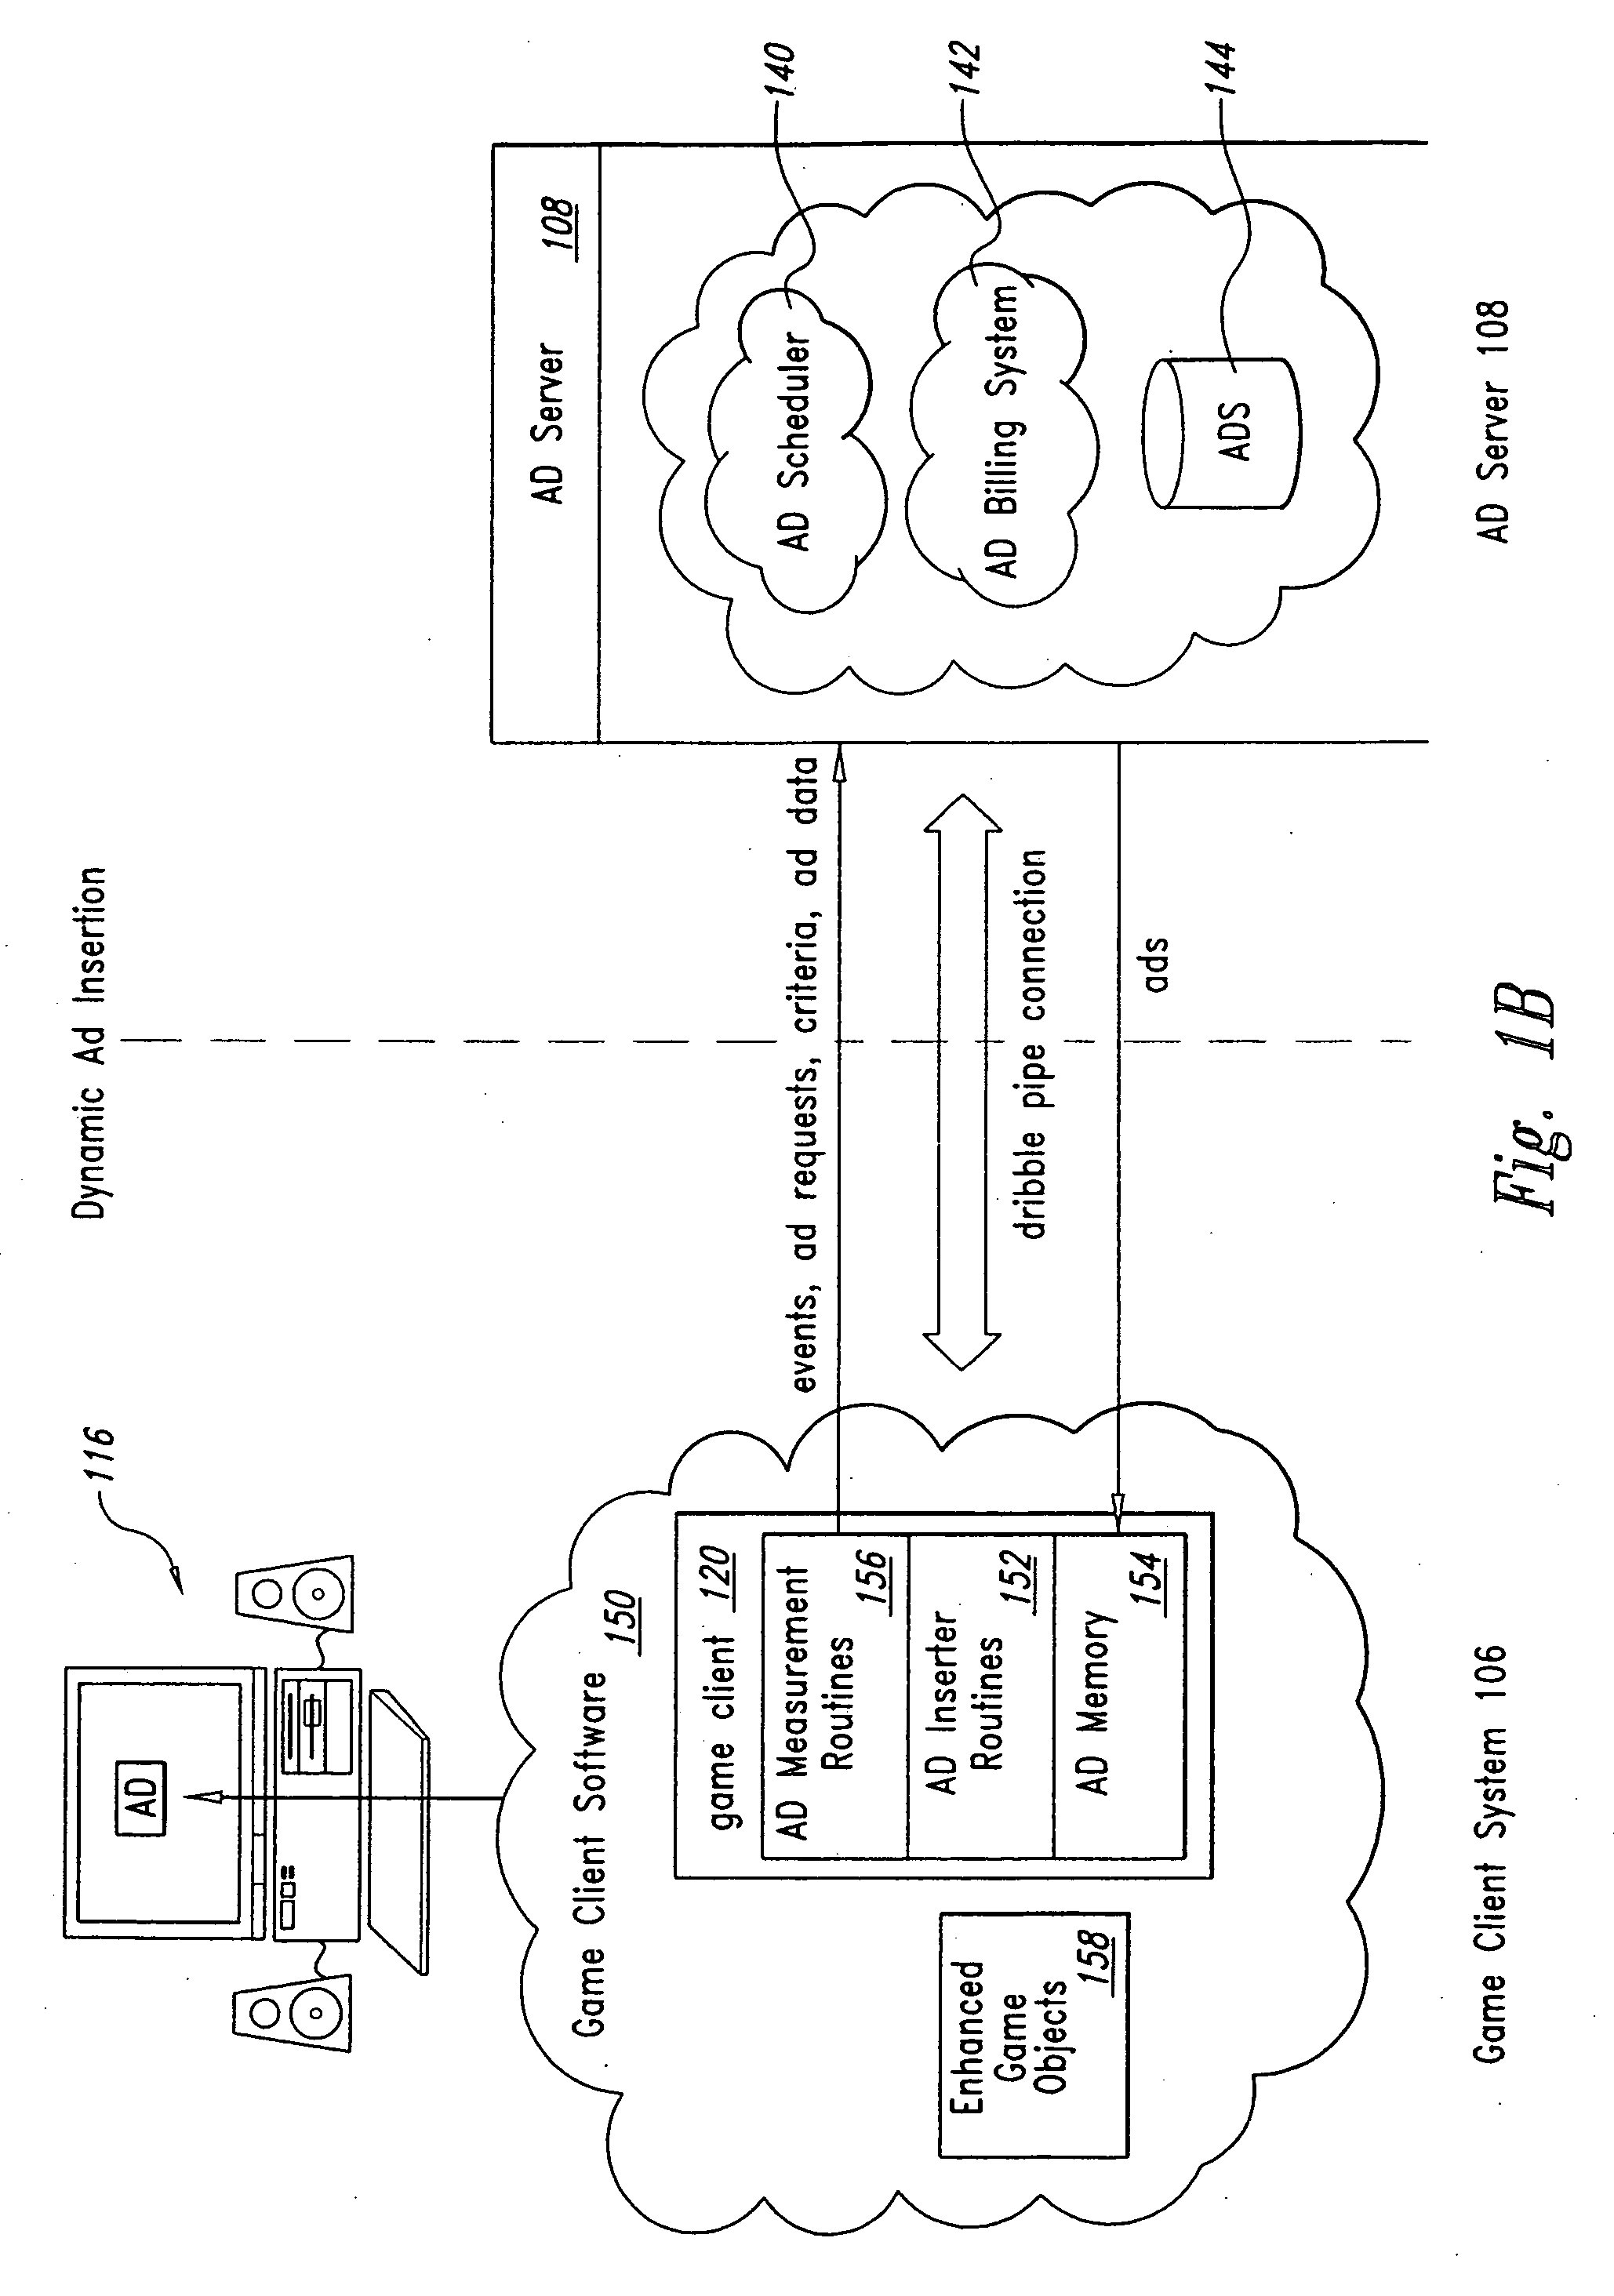 Method and system for dynamically incorporating advertising content into multimedia environments